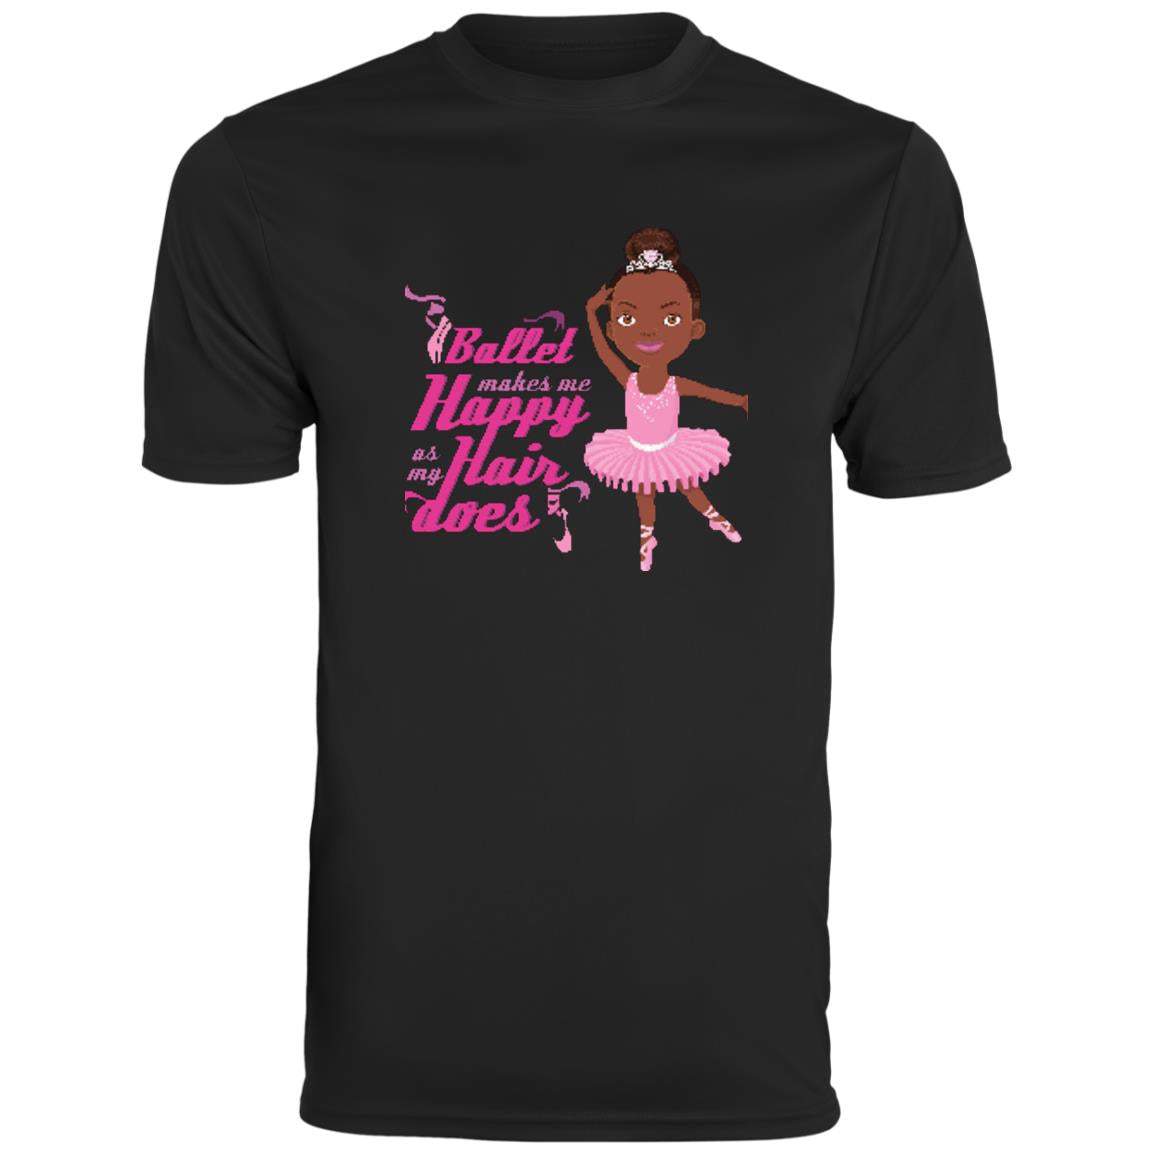 Ballerina Youth Moisture-Wicking Tee-Activewear,Featured Products,Short Sleeve,T-Shirts,Youth